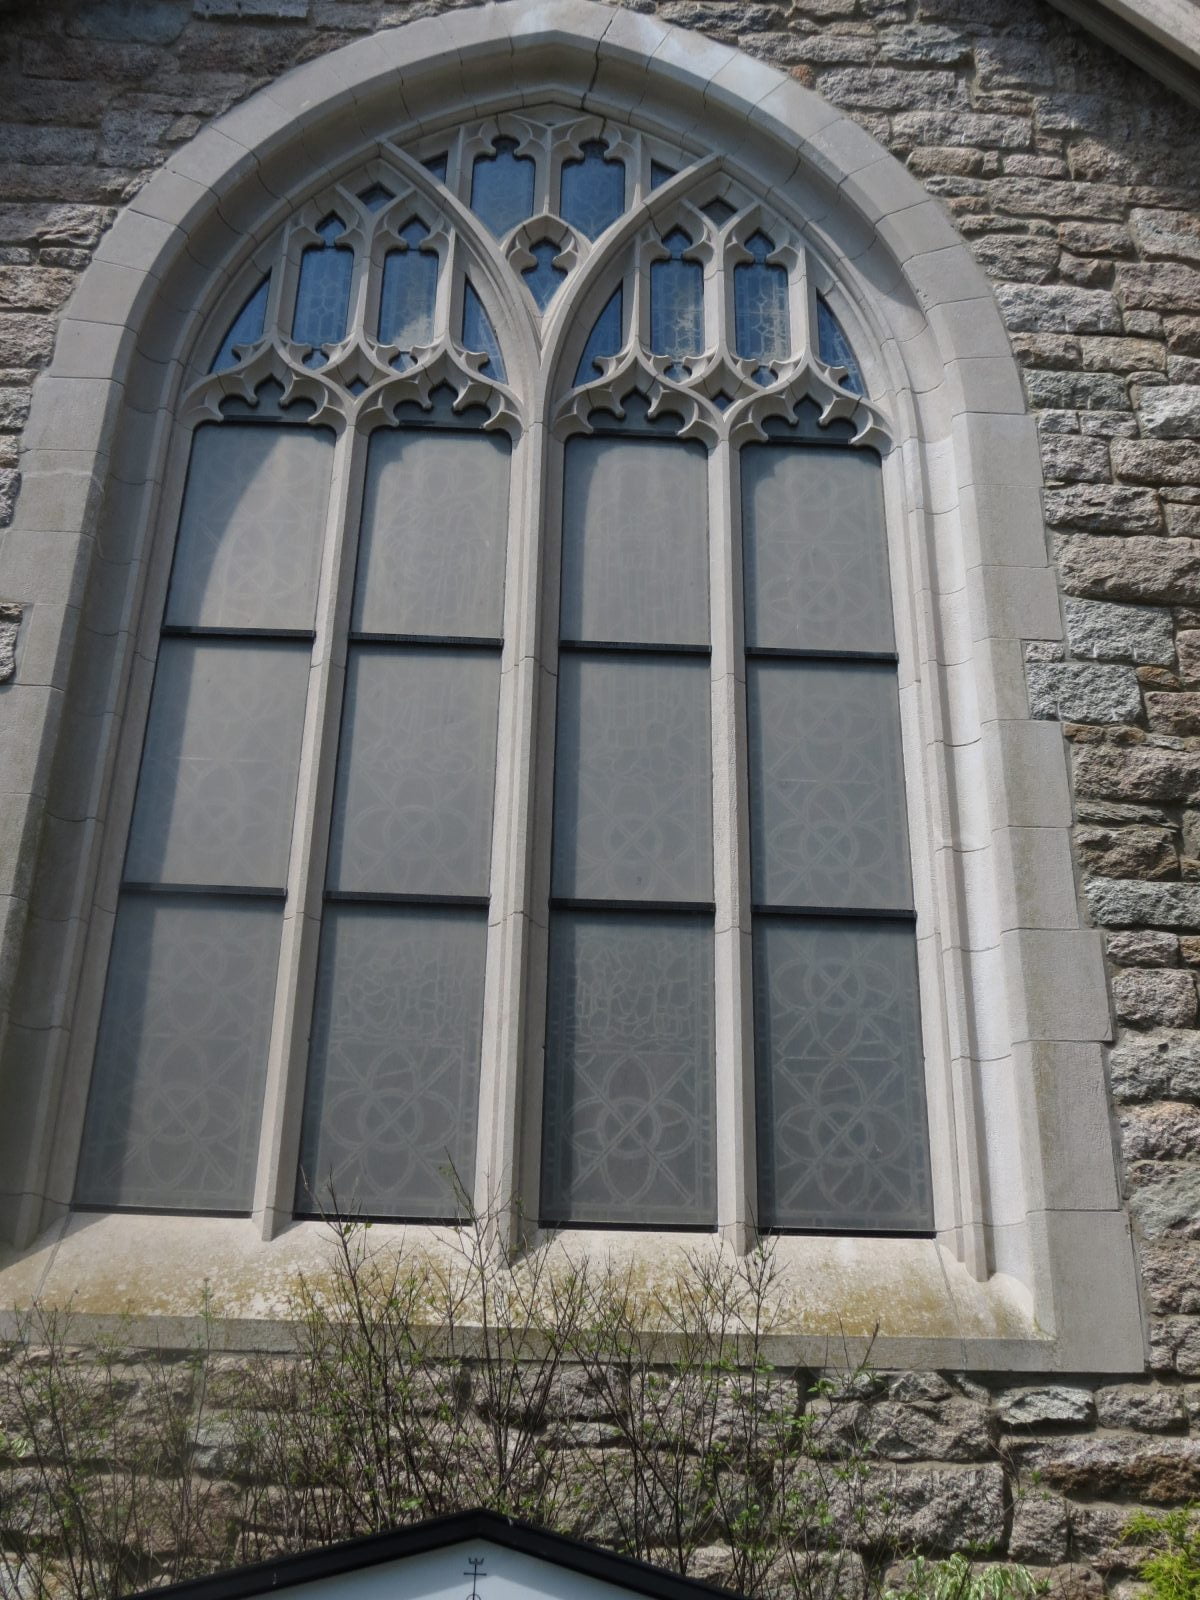 church stained glass window protective coverings, church stained glass windows, stained glass repair